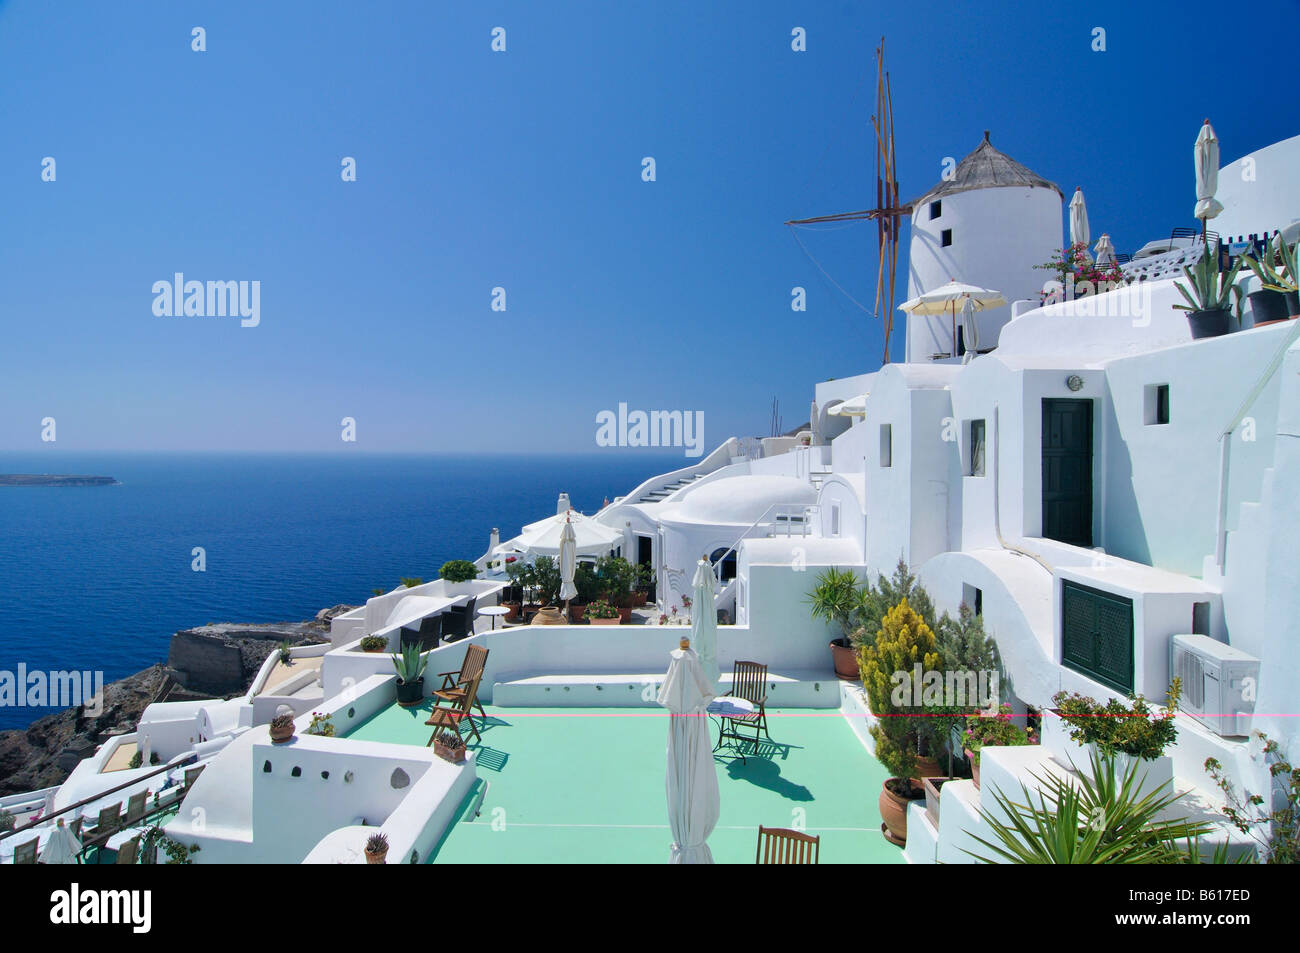 Typical Cycladic architecture and a windmill in front of the blue sea, Oia, Ia, Santorini, Cyclades, Greece, Europe Stock Photo